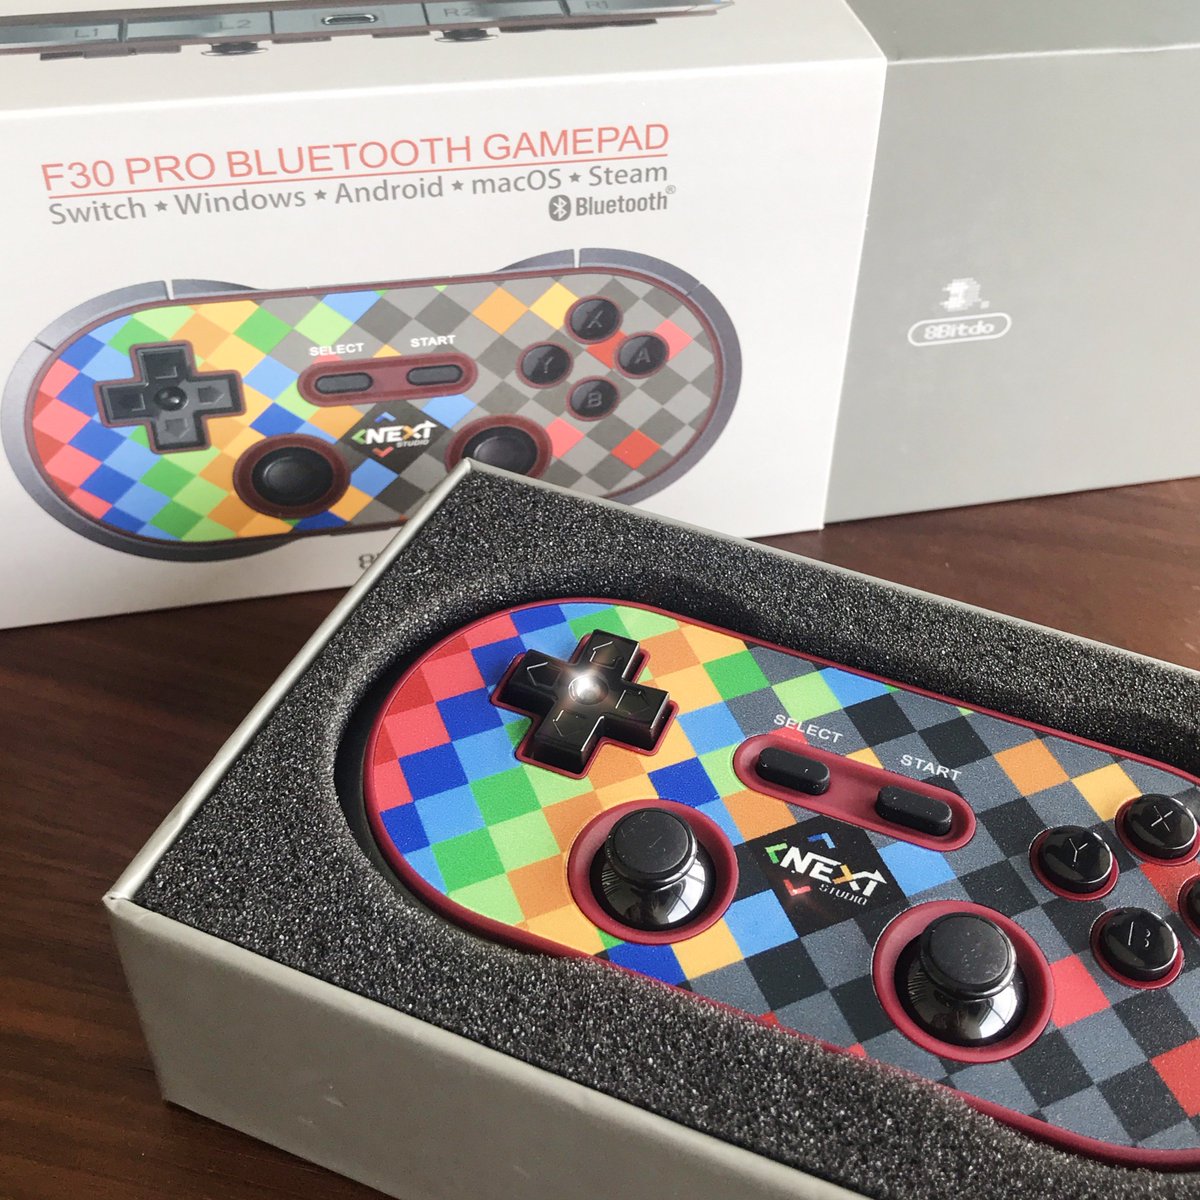 salaris holte Dislocatie 8BitDo on Twitter: "Our partner Next Studio is attending EVO and PAX next  month with our customised F30 Pro controller. Check it out there if you go  #Next Studio https://t.co/kdyiHy82ms" / X